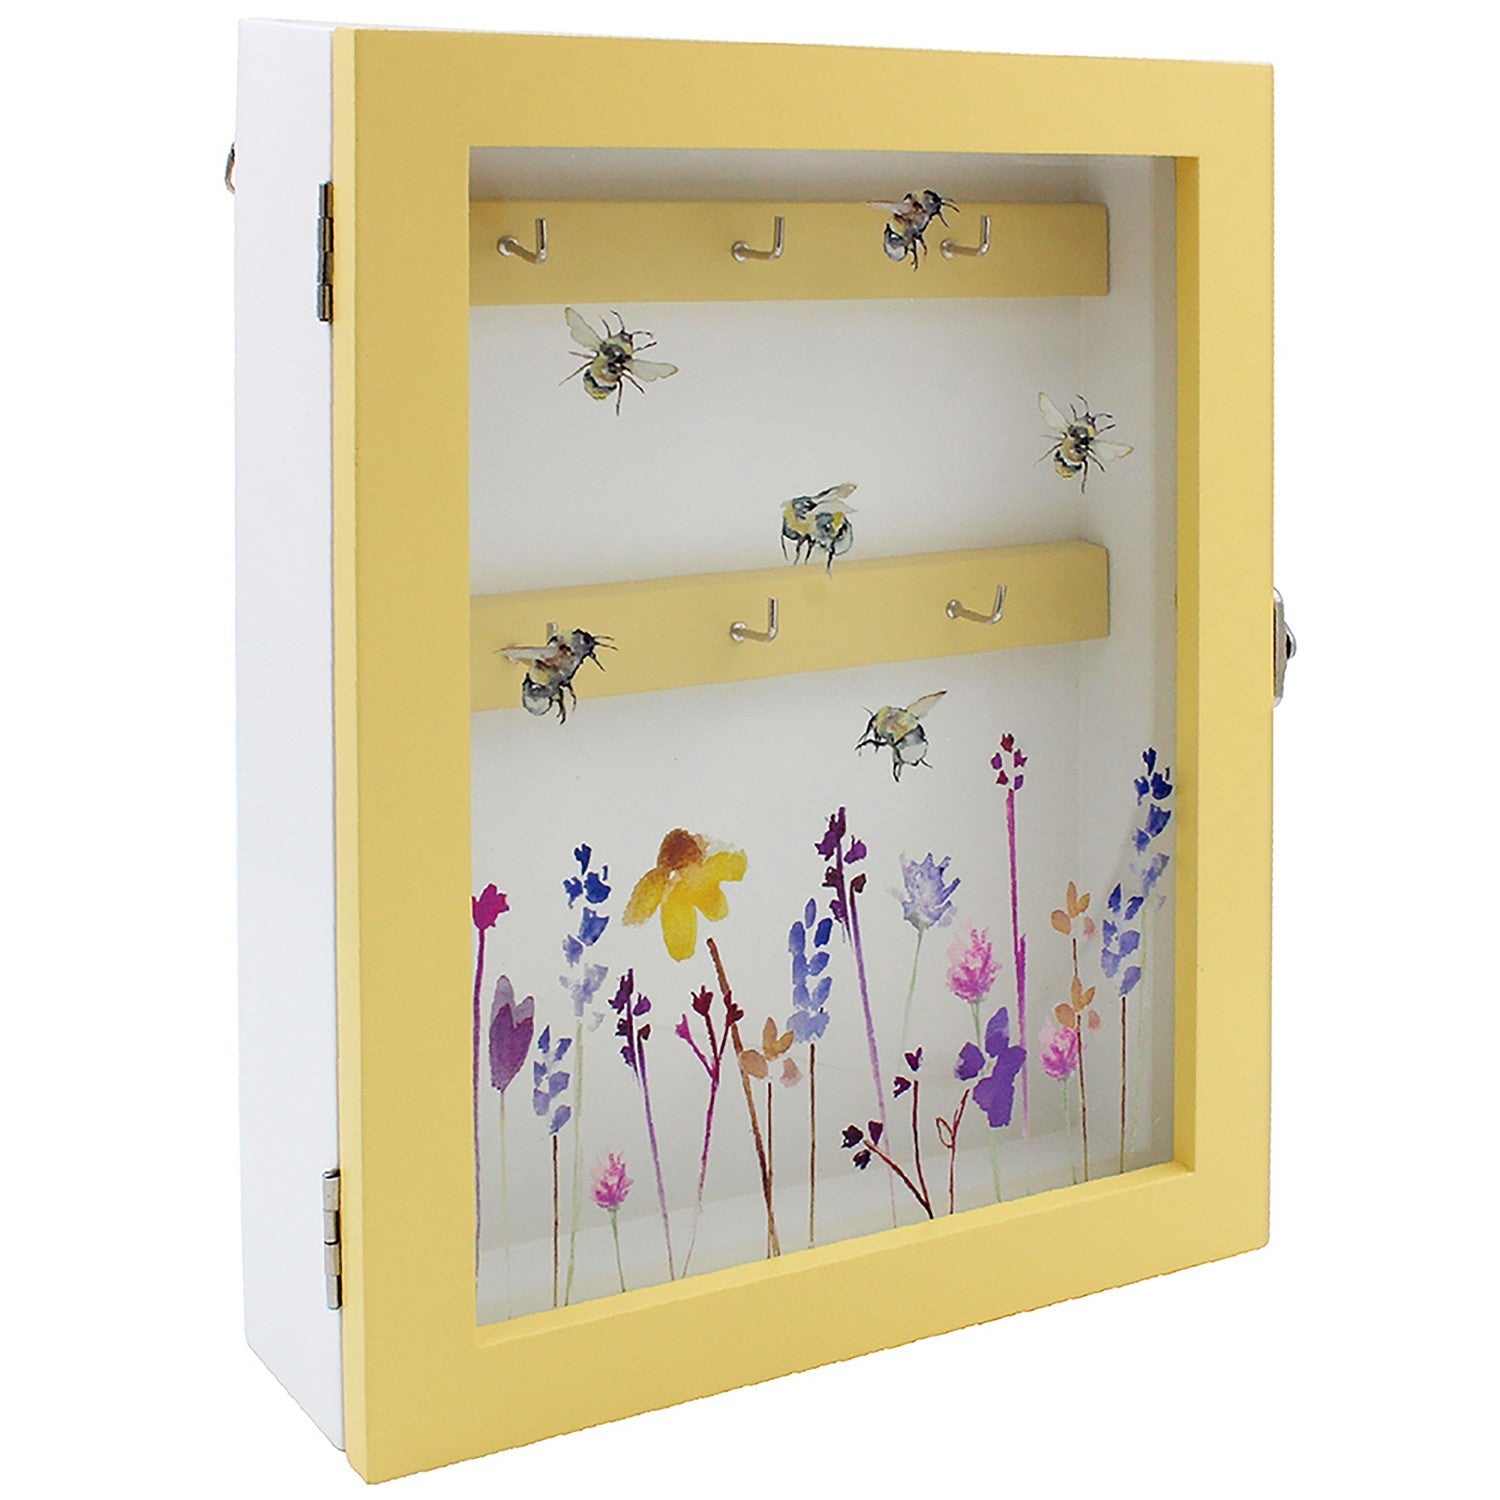 Bees & Flowers Key Cabinet